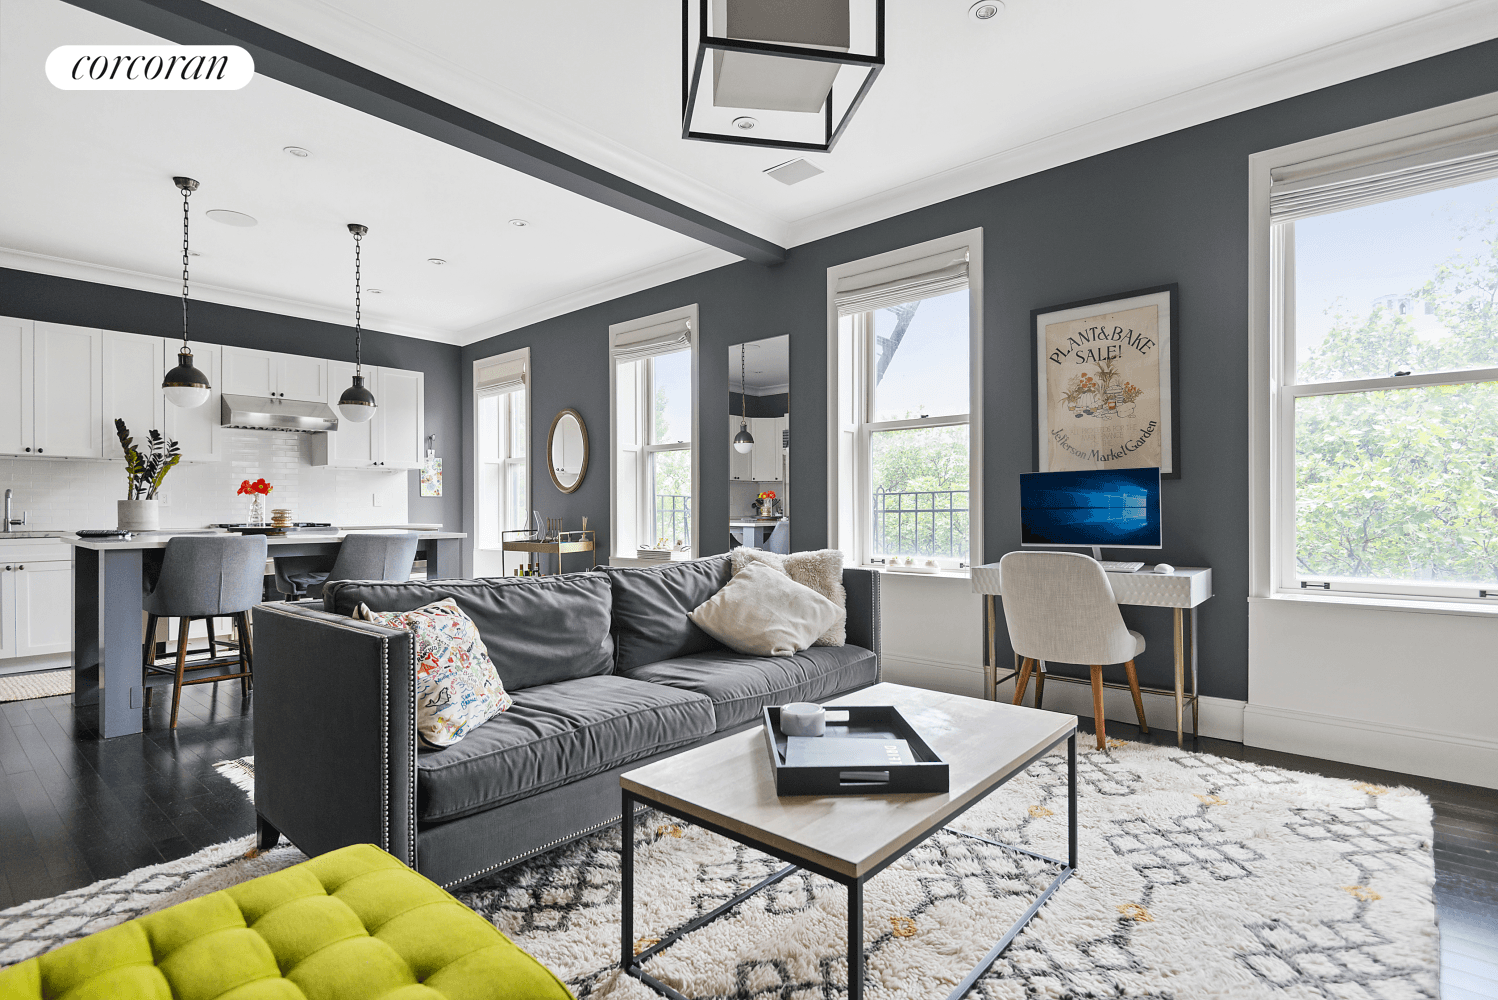 Don't miss your chance to own a piece of New York heritage infused with modern day charm at 111 West 11th Street.